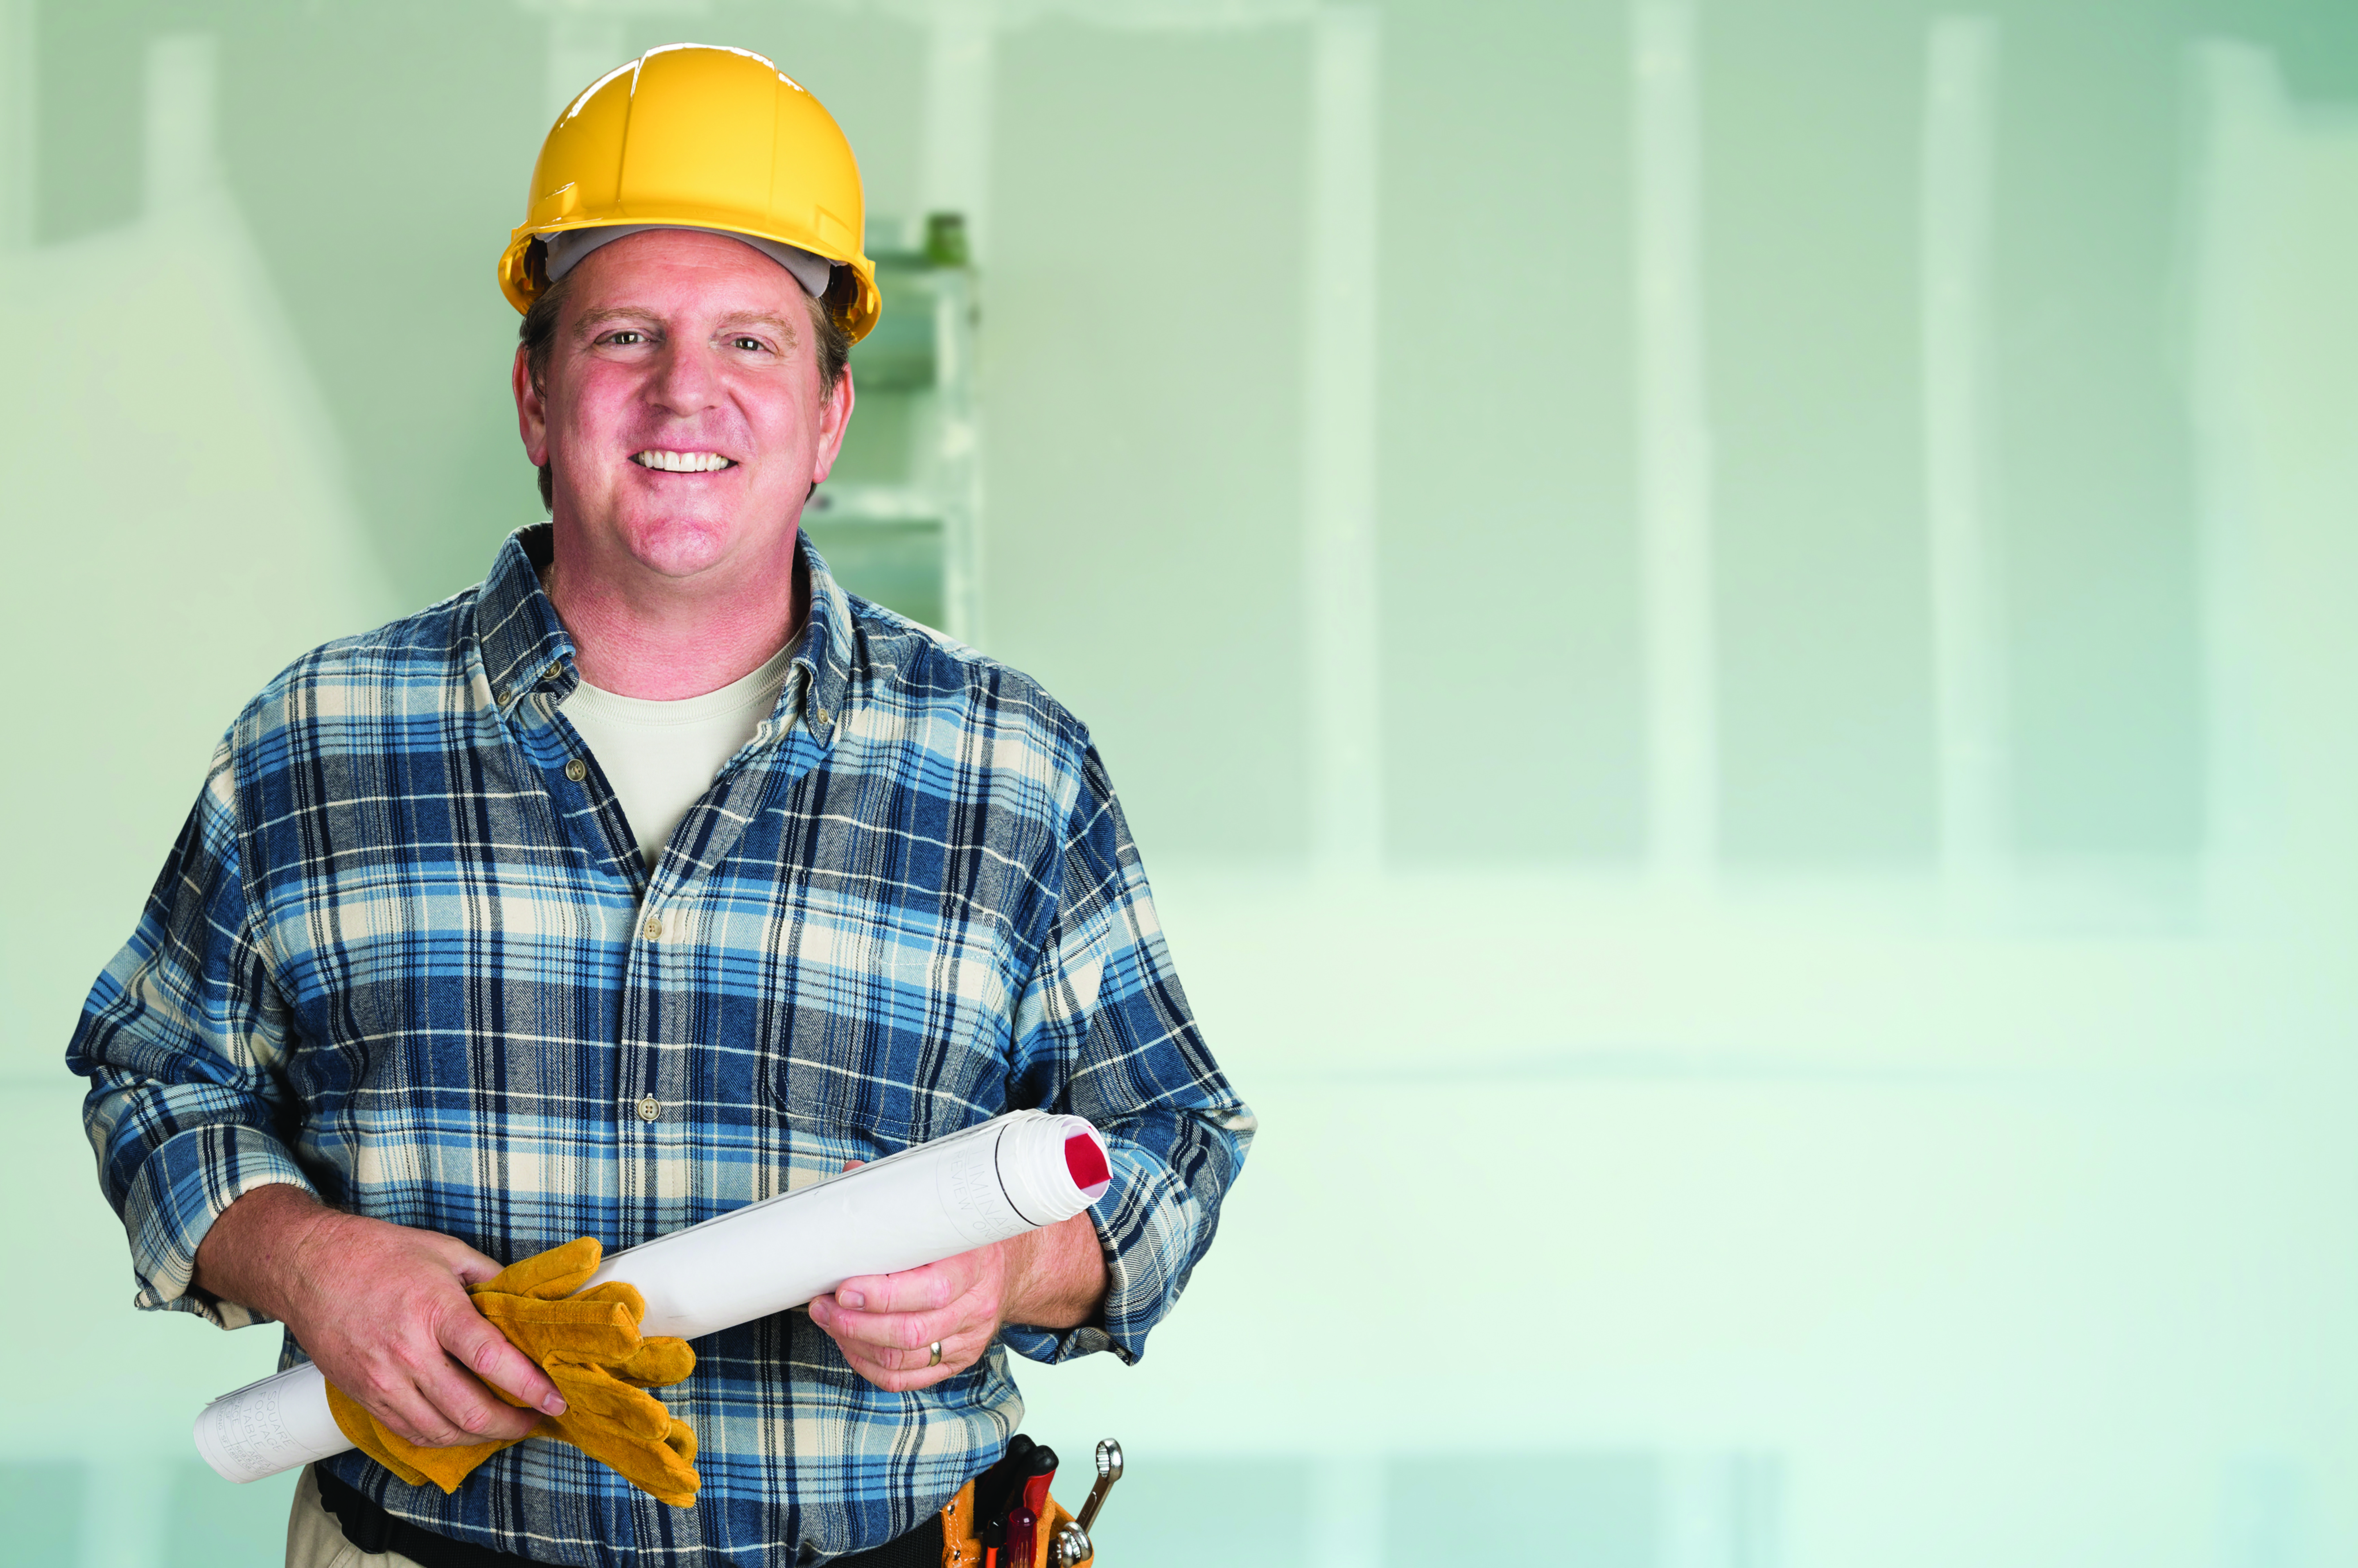 contractor stock photo - CCA Images